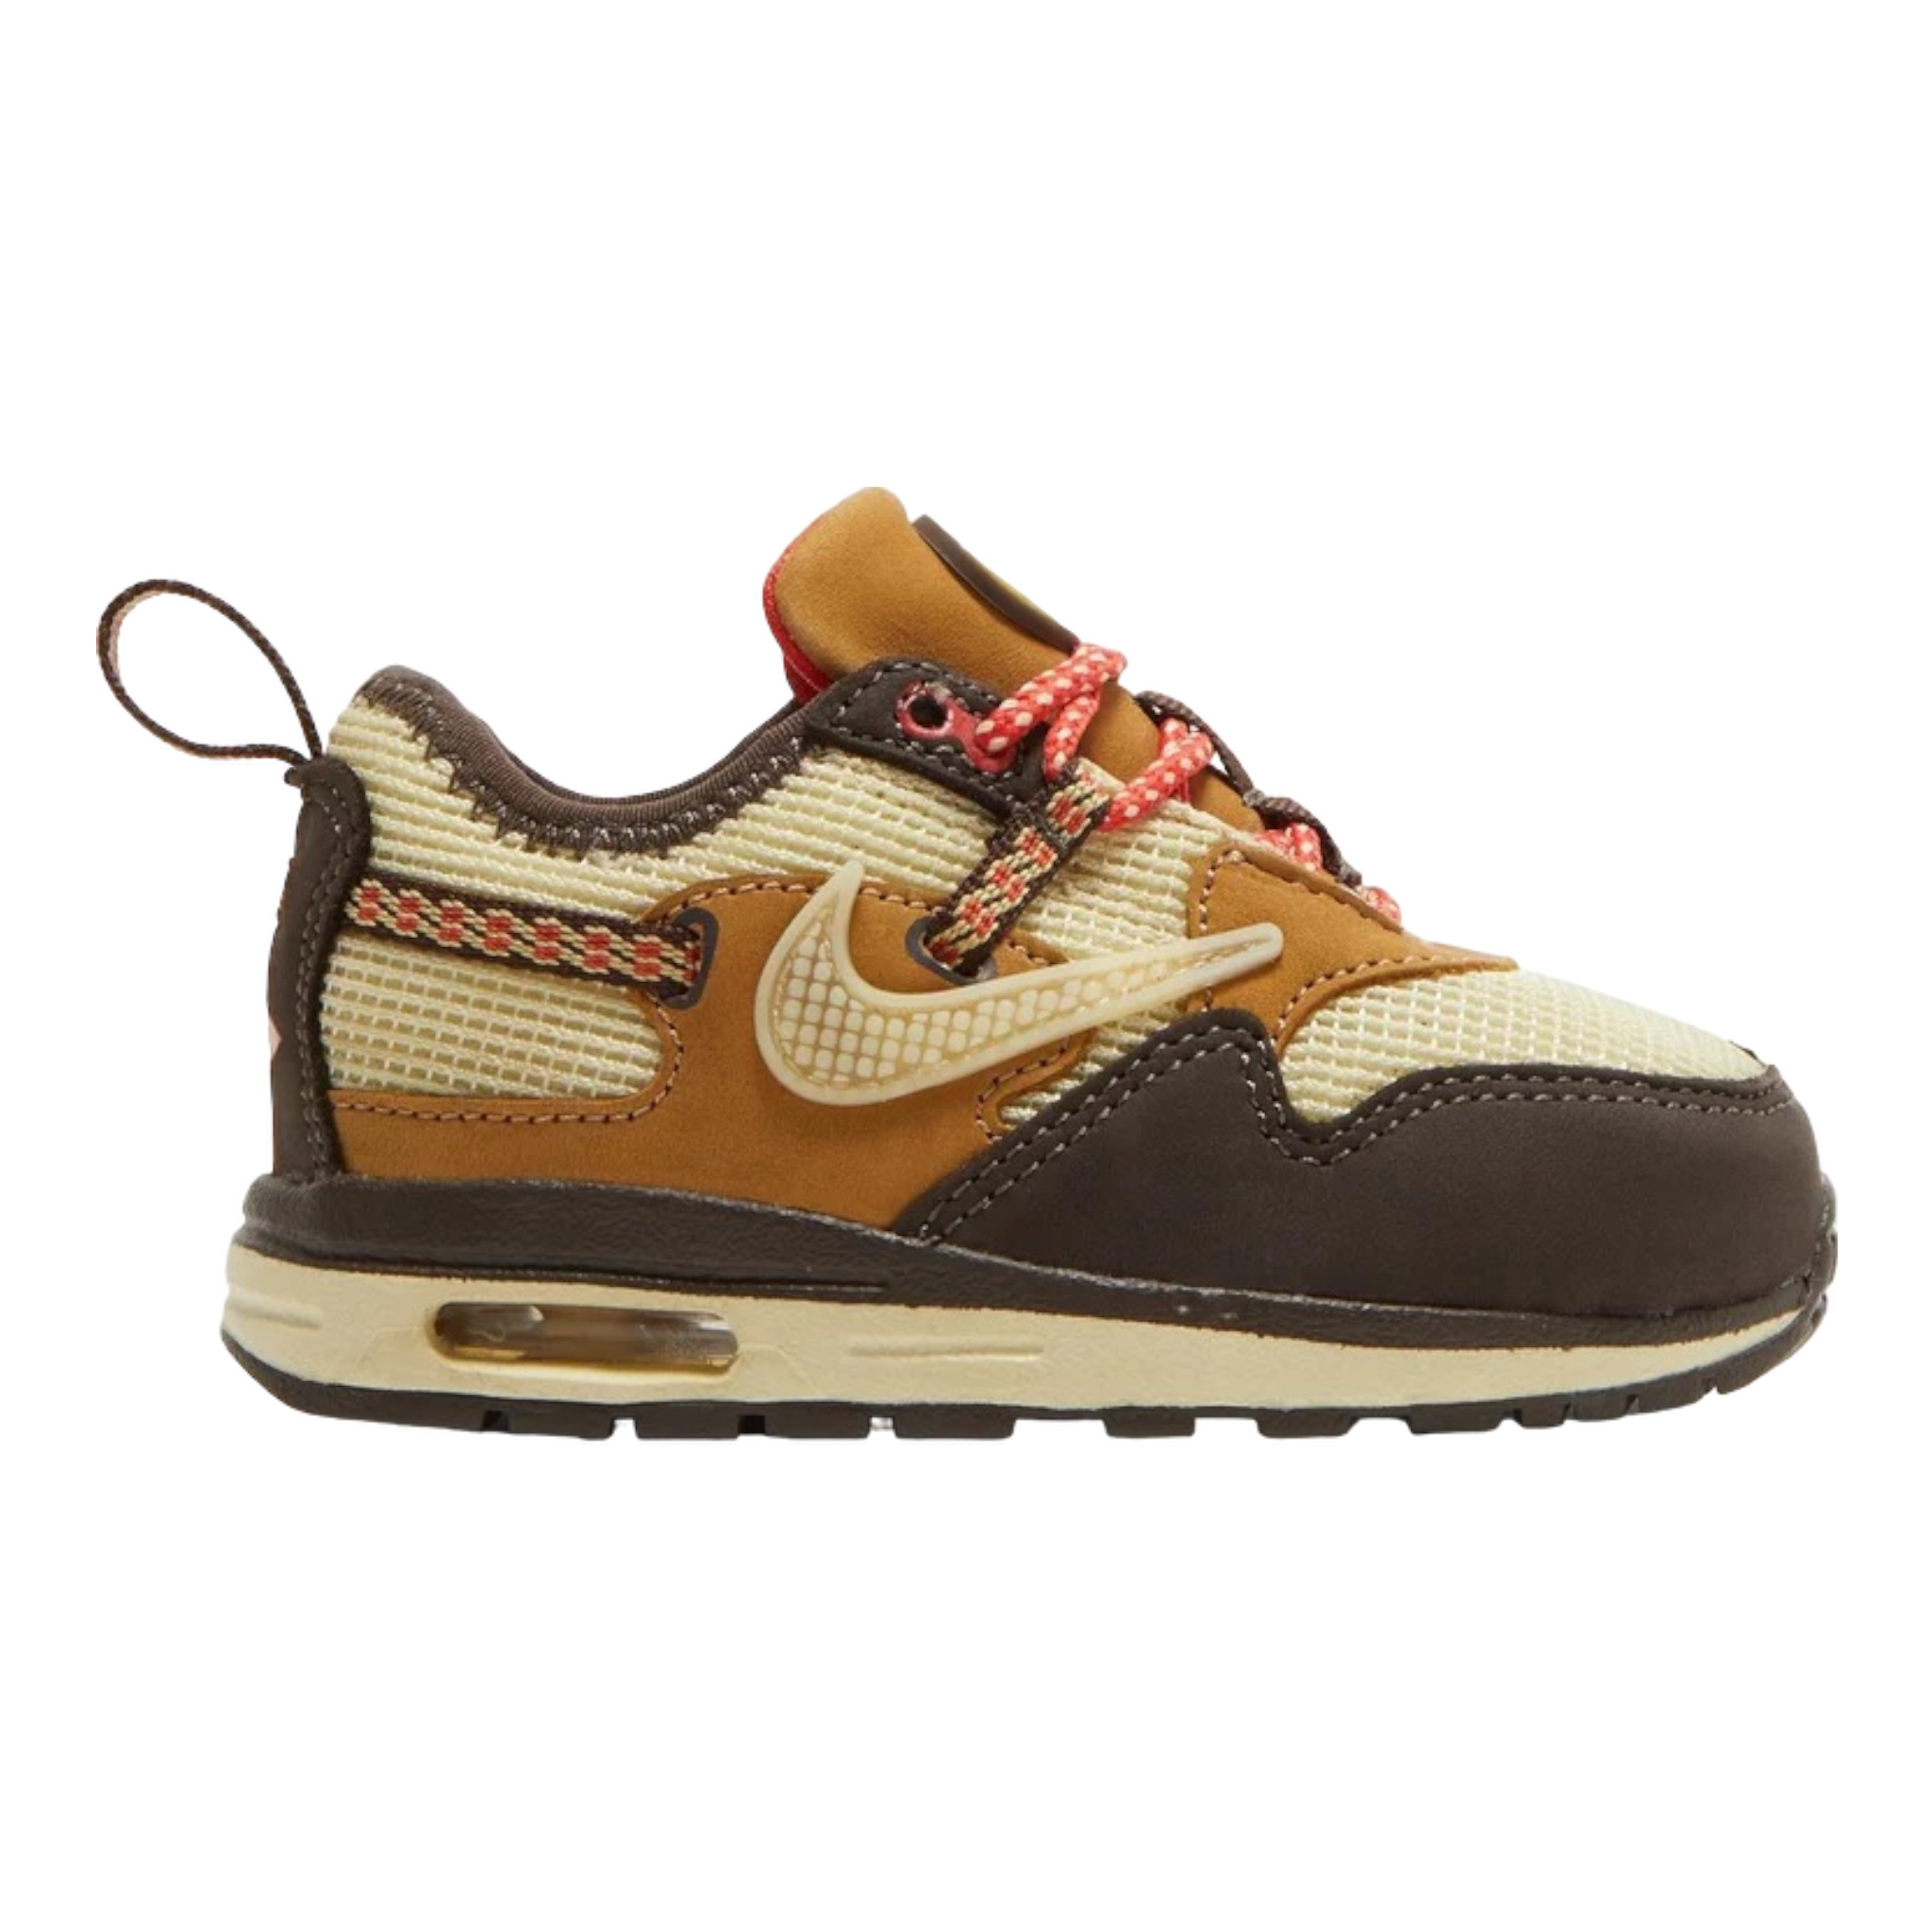 Travis Scott x Nike Air Max 1 Collection Release Date